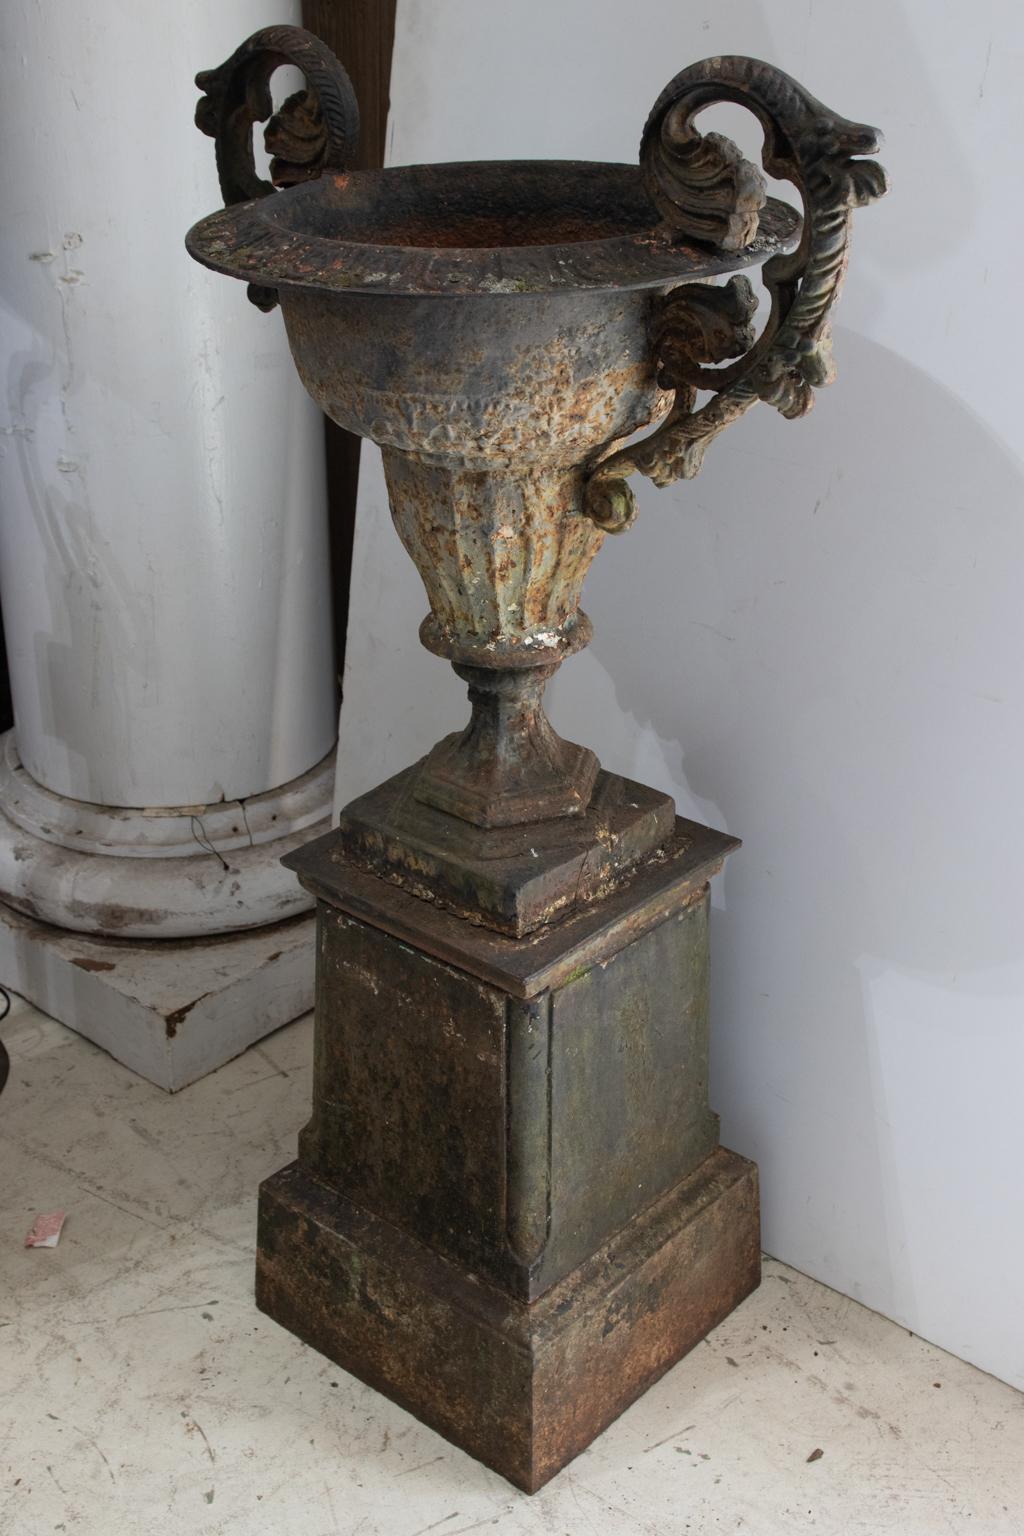 Circa 19th century cast iron urn on plinth base with double handles. Please note of wear consistent with age and exposure to the elements such as patina and oxidation throughout.